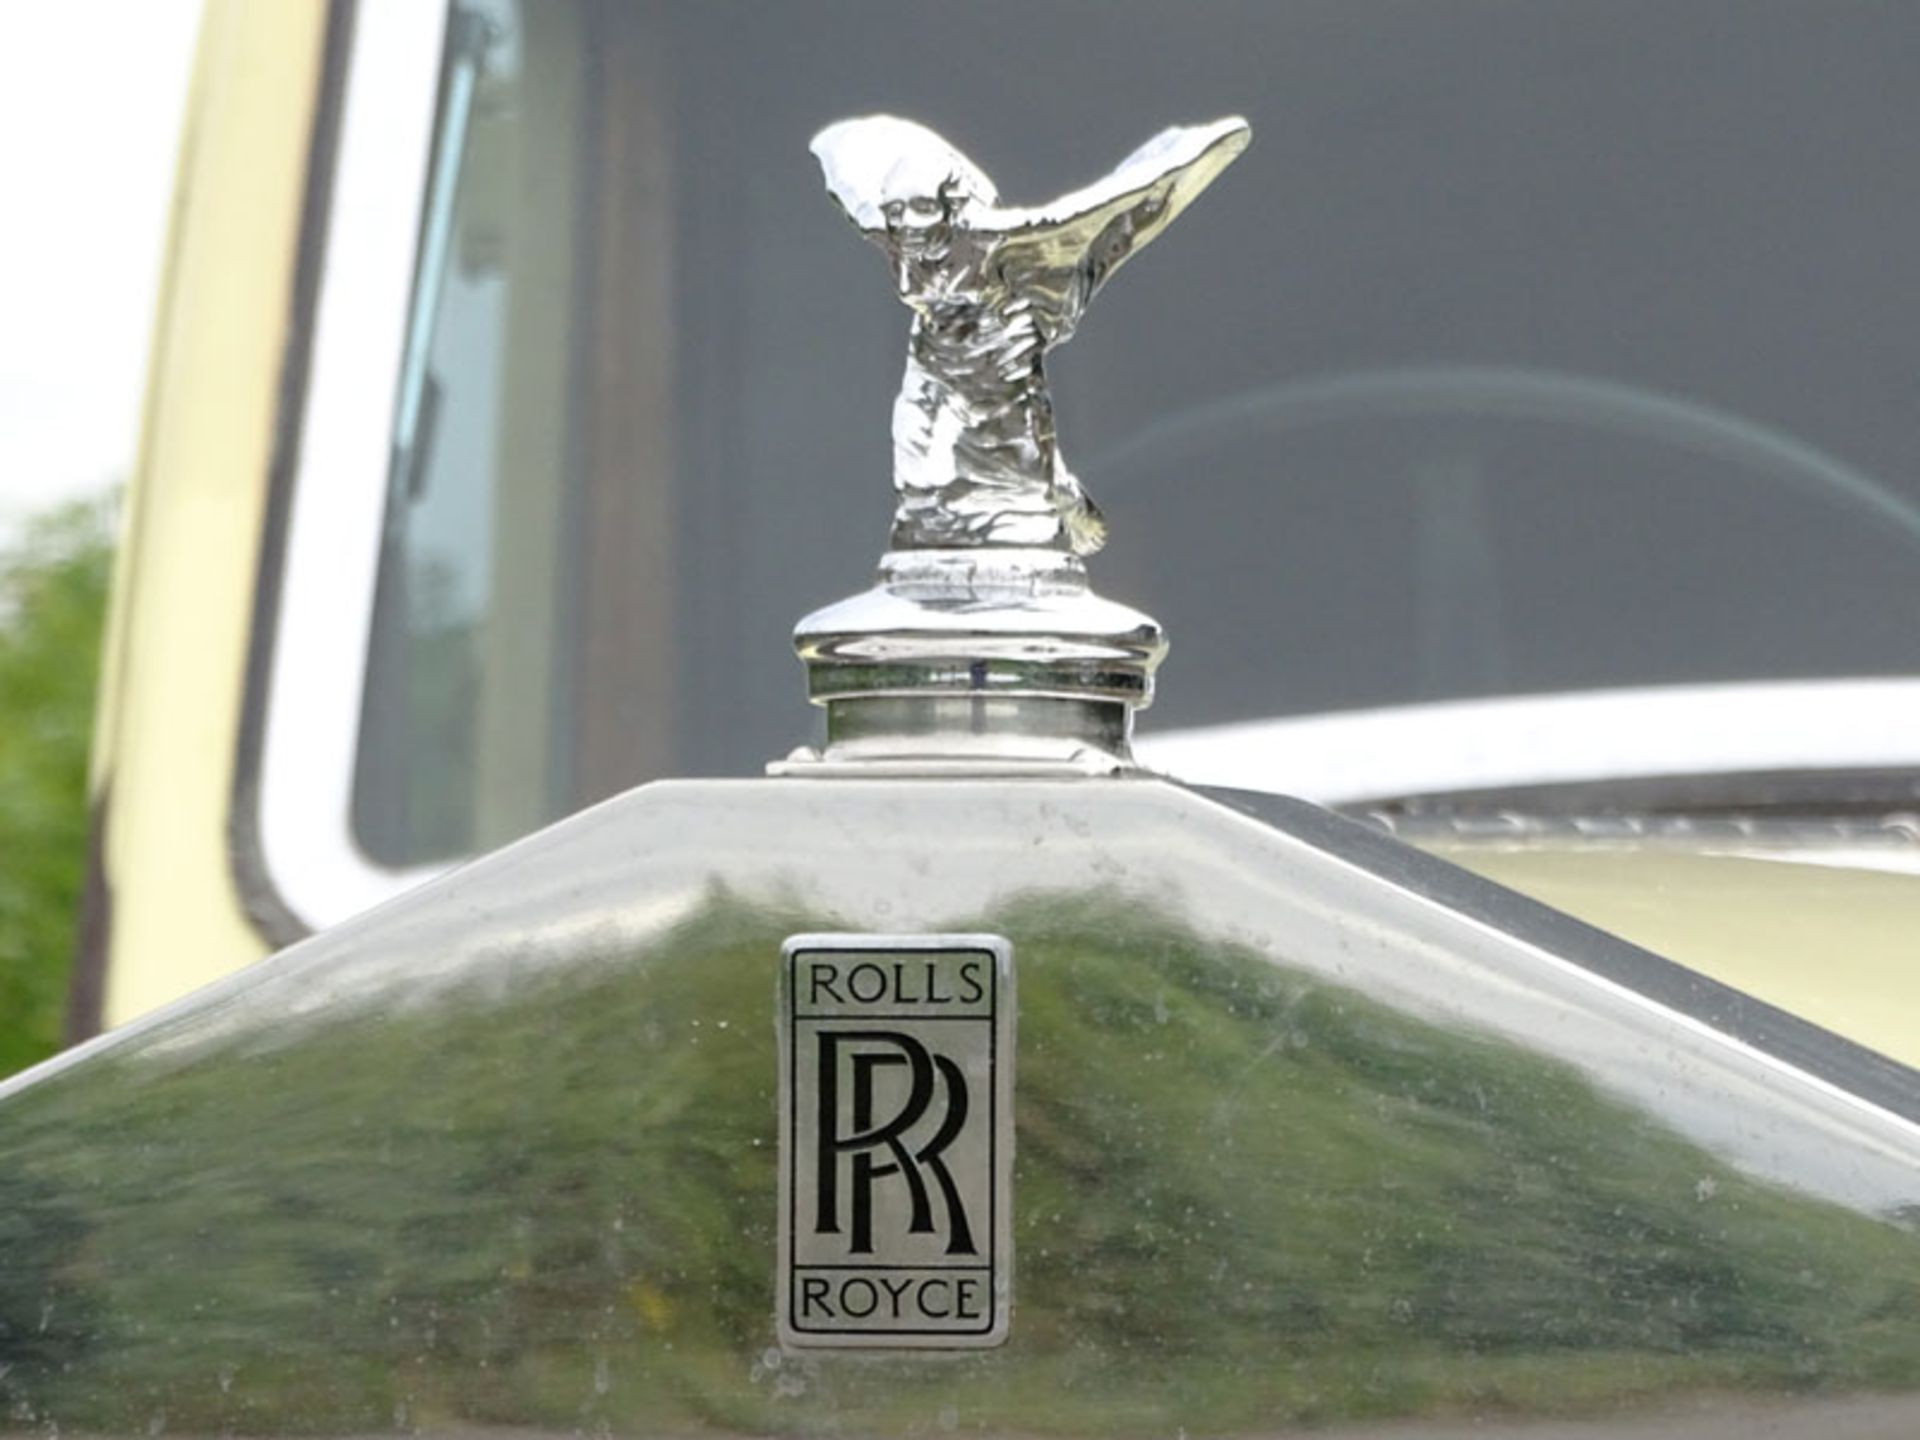 1935 Rolls-Royce 25/30 Saloon with Division - Image 12 of 12